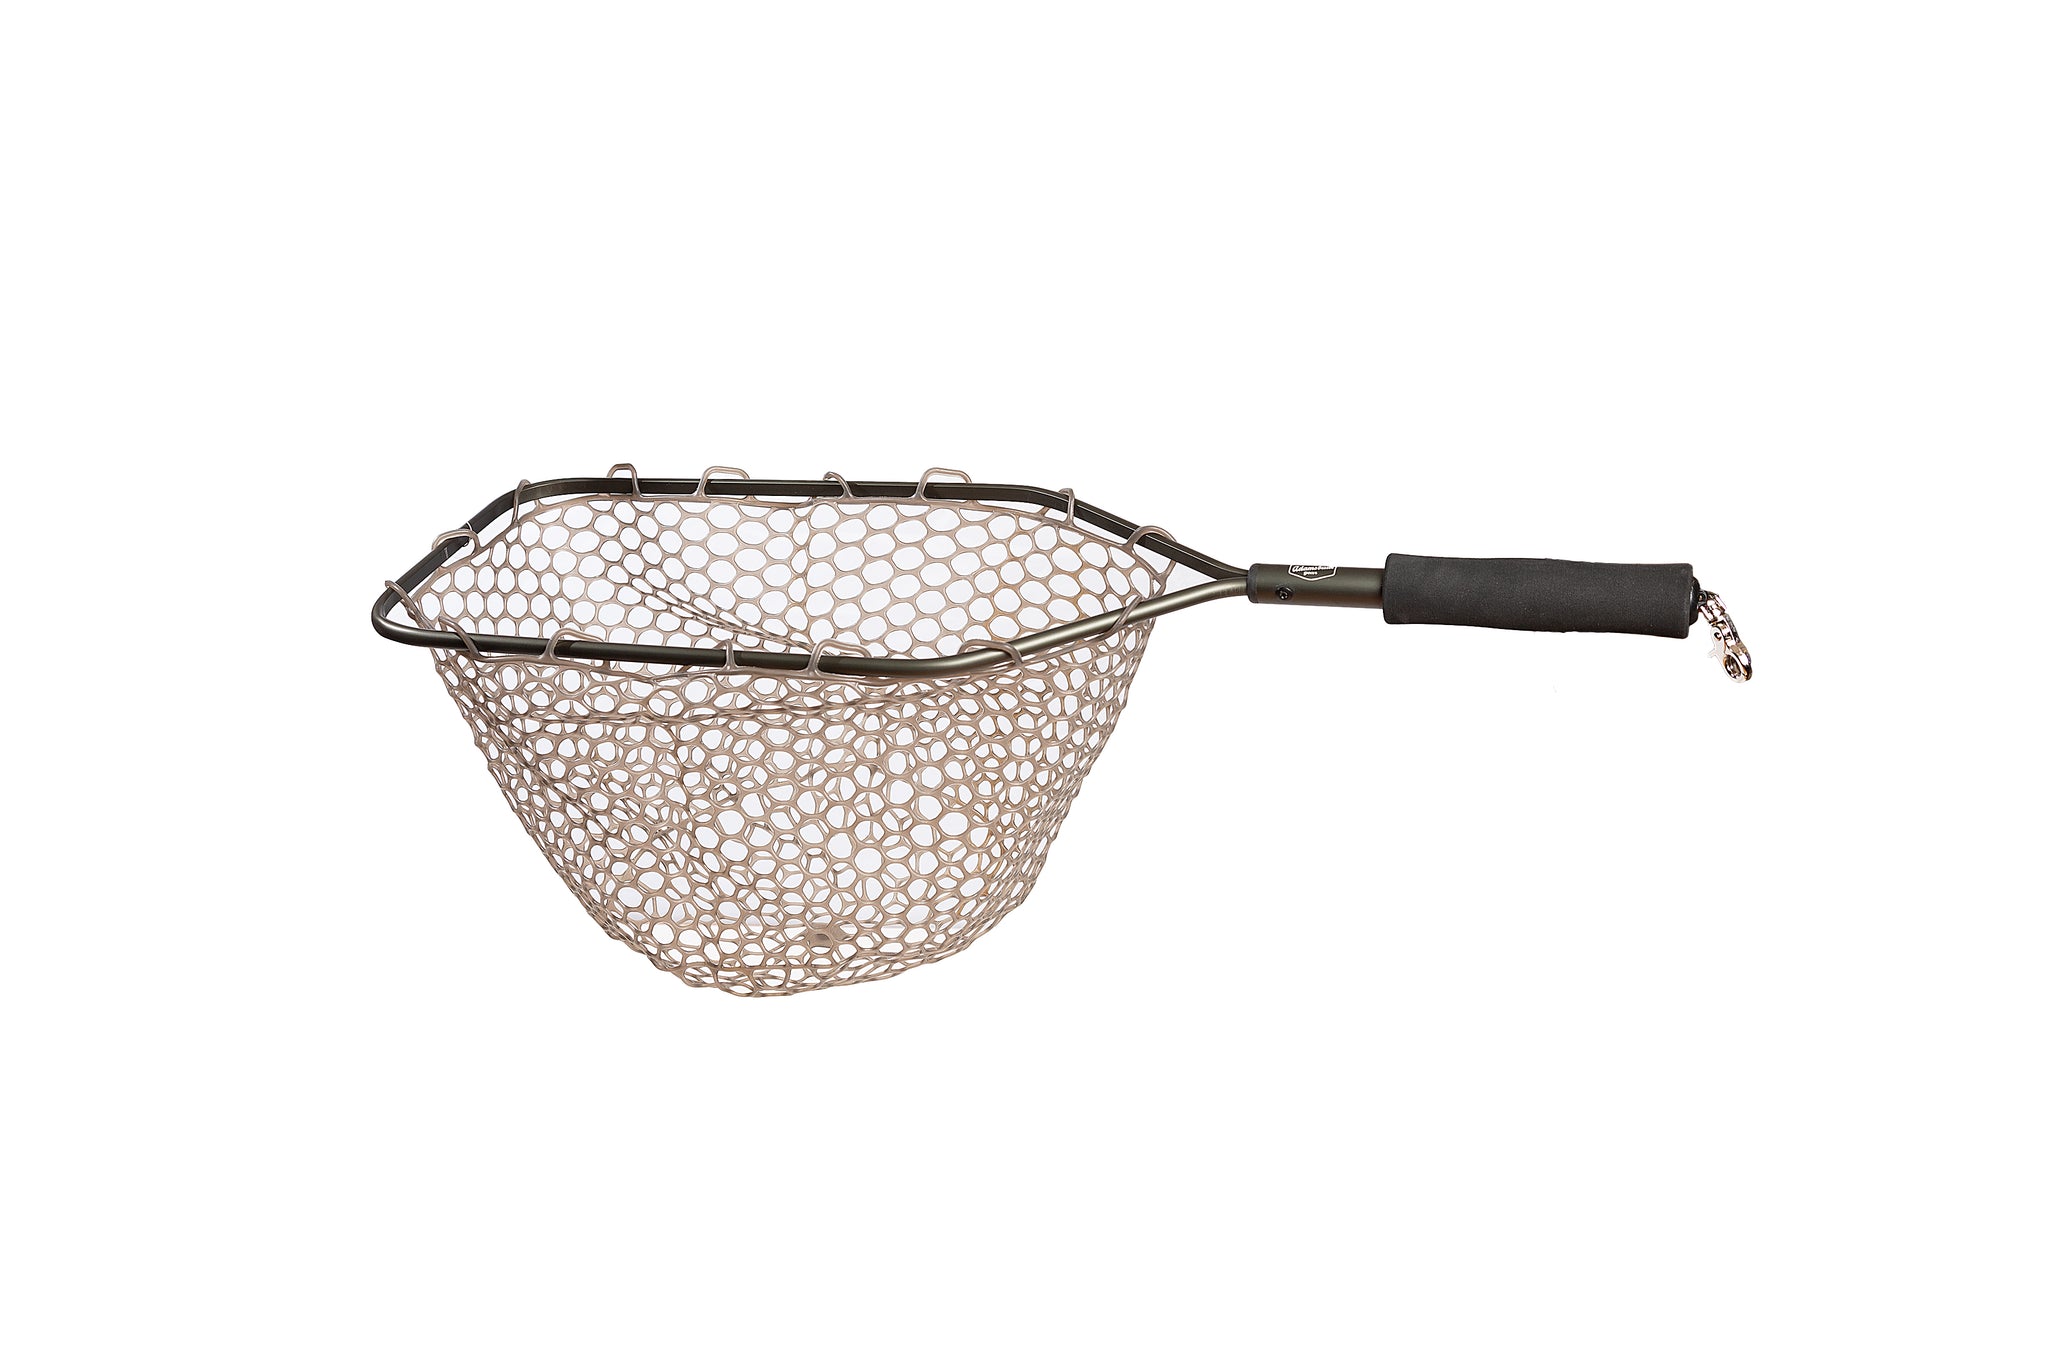 Aluminum Catch and Release Net, 15" with Camo Ghost Netting (GCRN15)